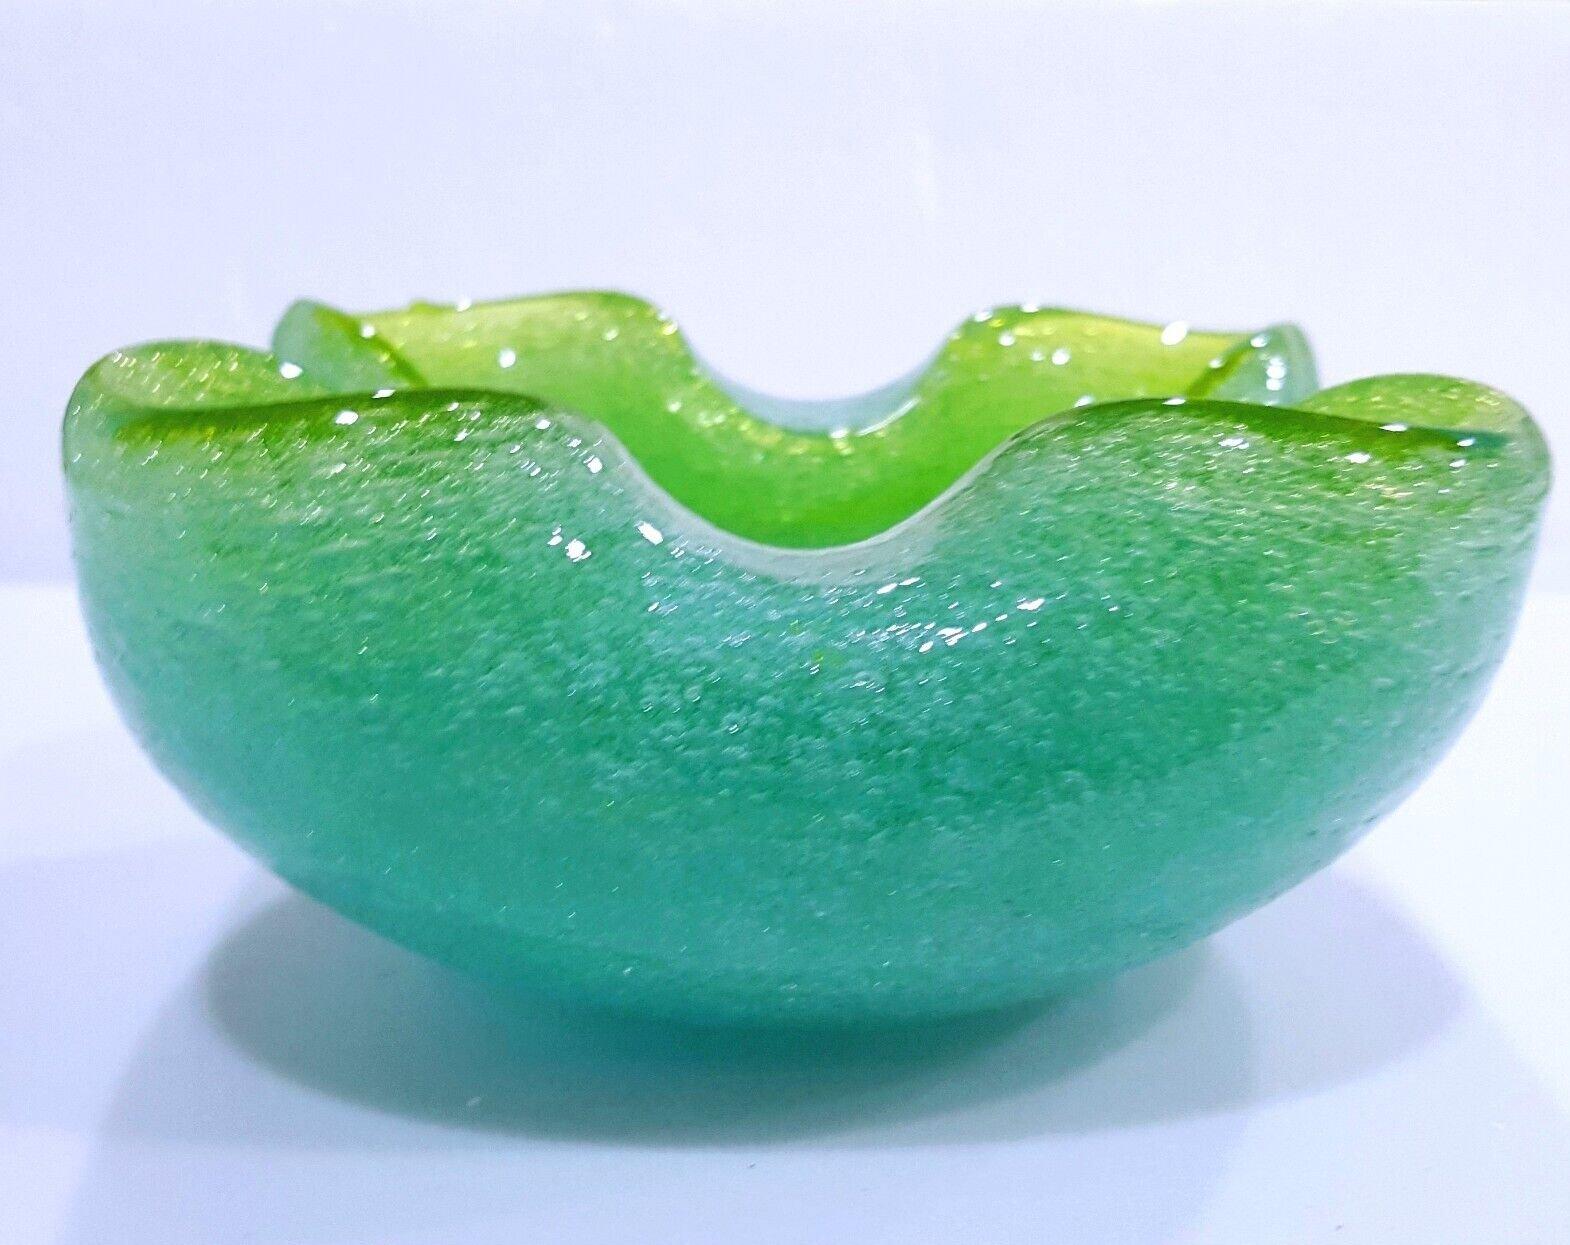 Vintage Murano Glass Pulegoso Bowl, Seguso

This is a handsome bowl with a blueish/aqua blue submersed or encased in green, making most of the bowl appear an aqualike blue, with the rim area more of a green. (Please see video for detail). We found